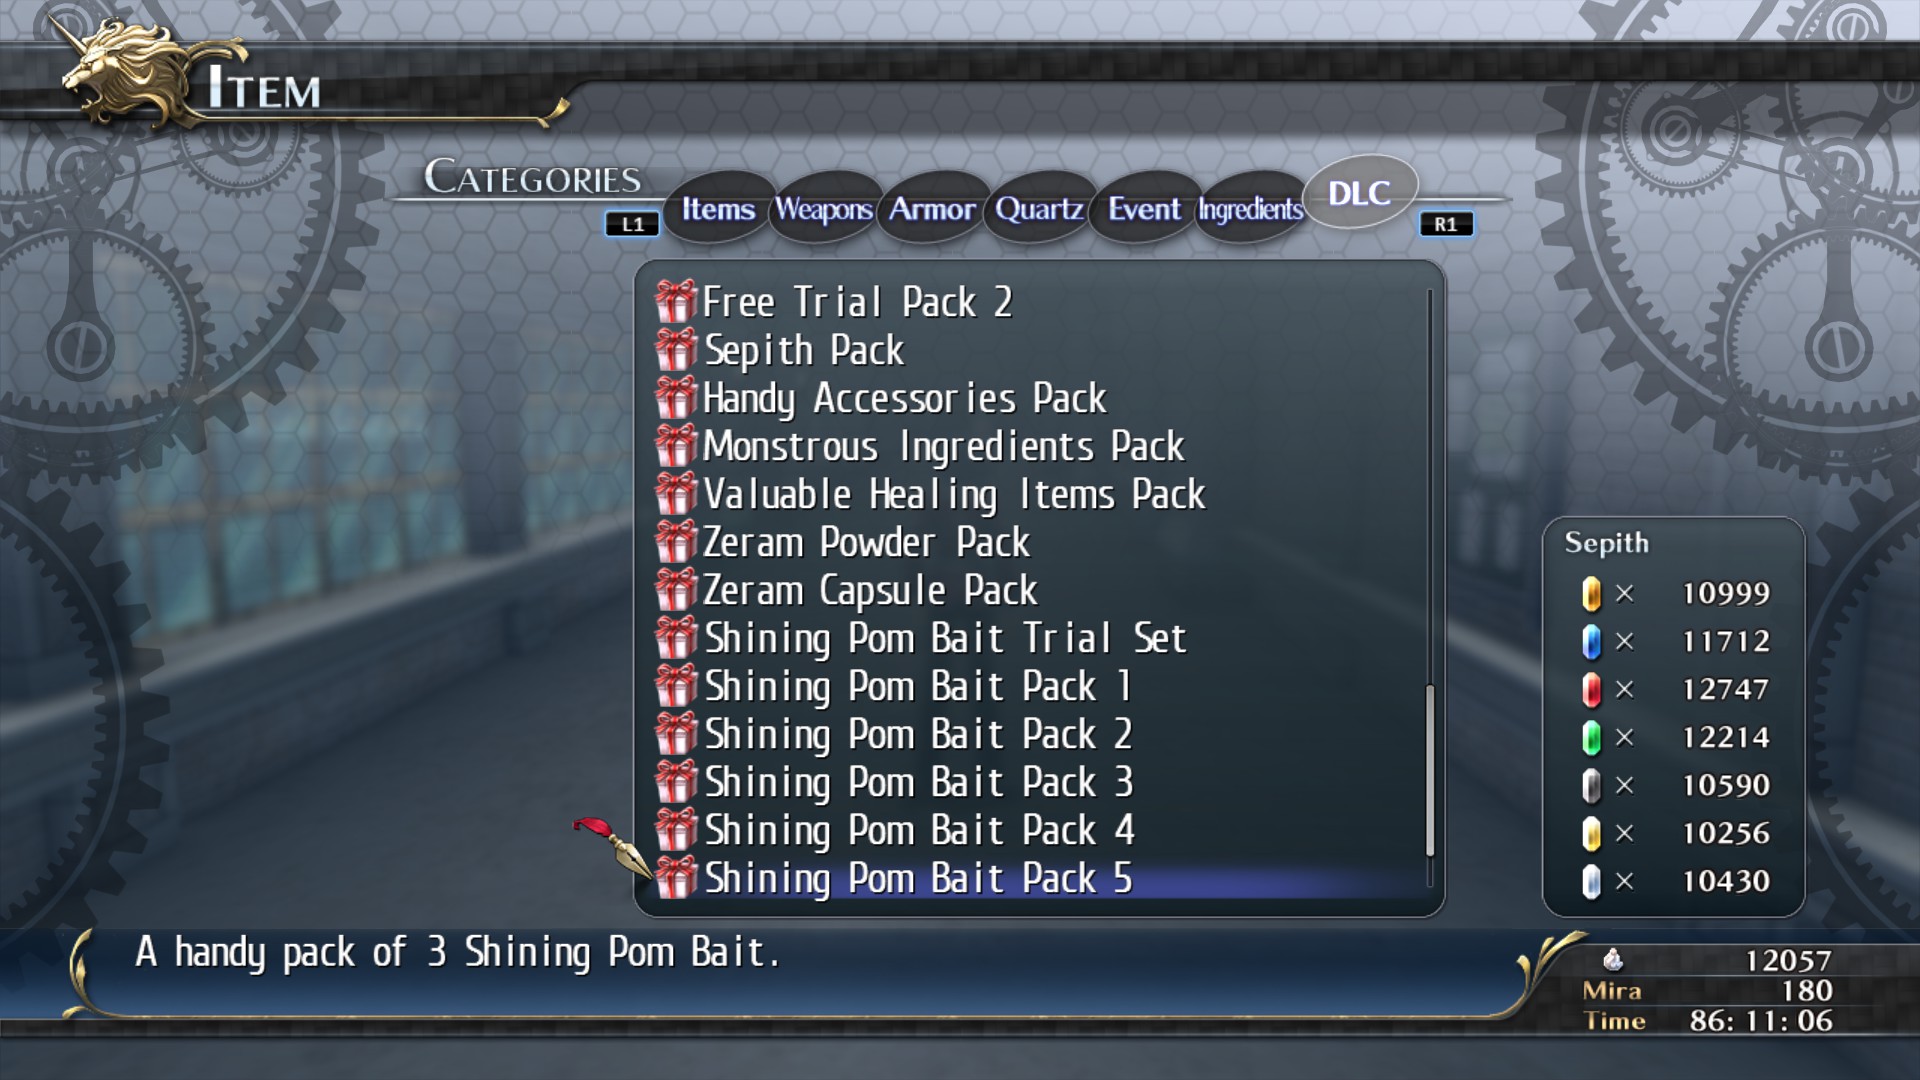 The Legend of Heroes: Trails of Cold Steel - Shining Pom Bait Pack 5 Featured Screenshot #1